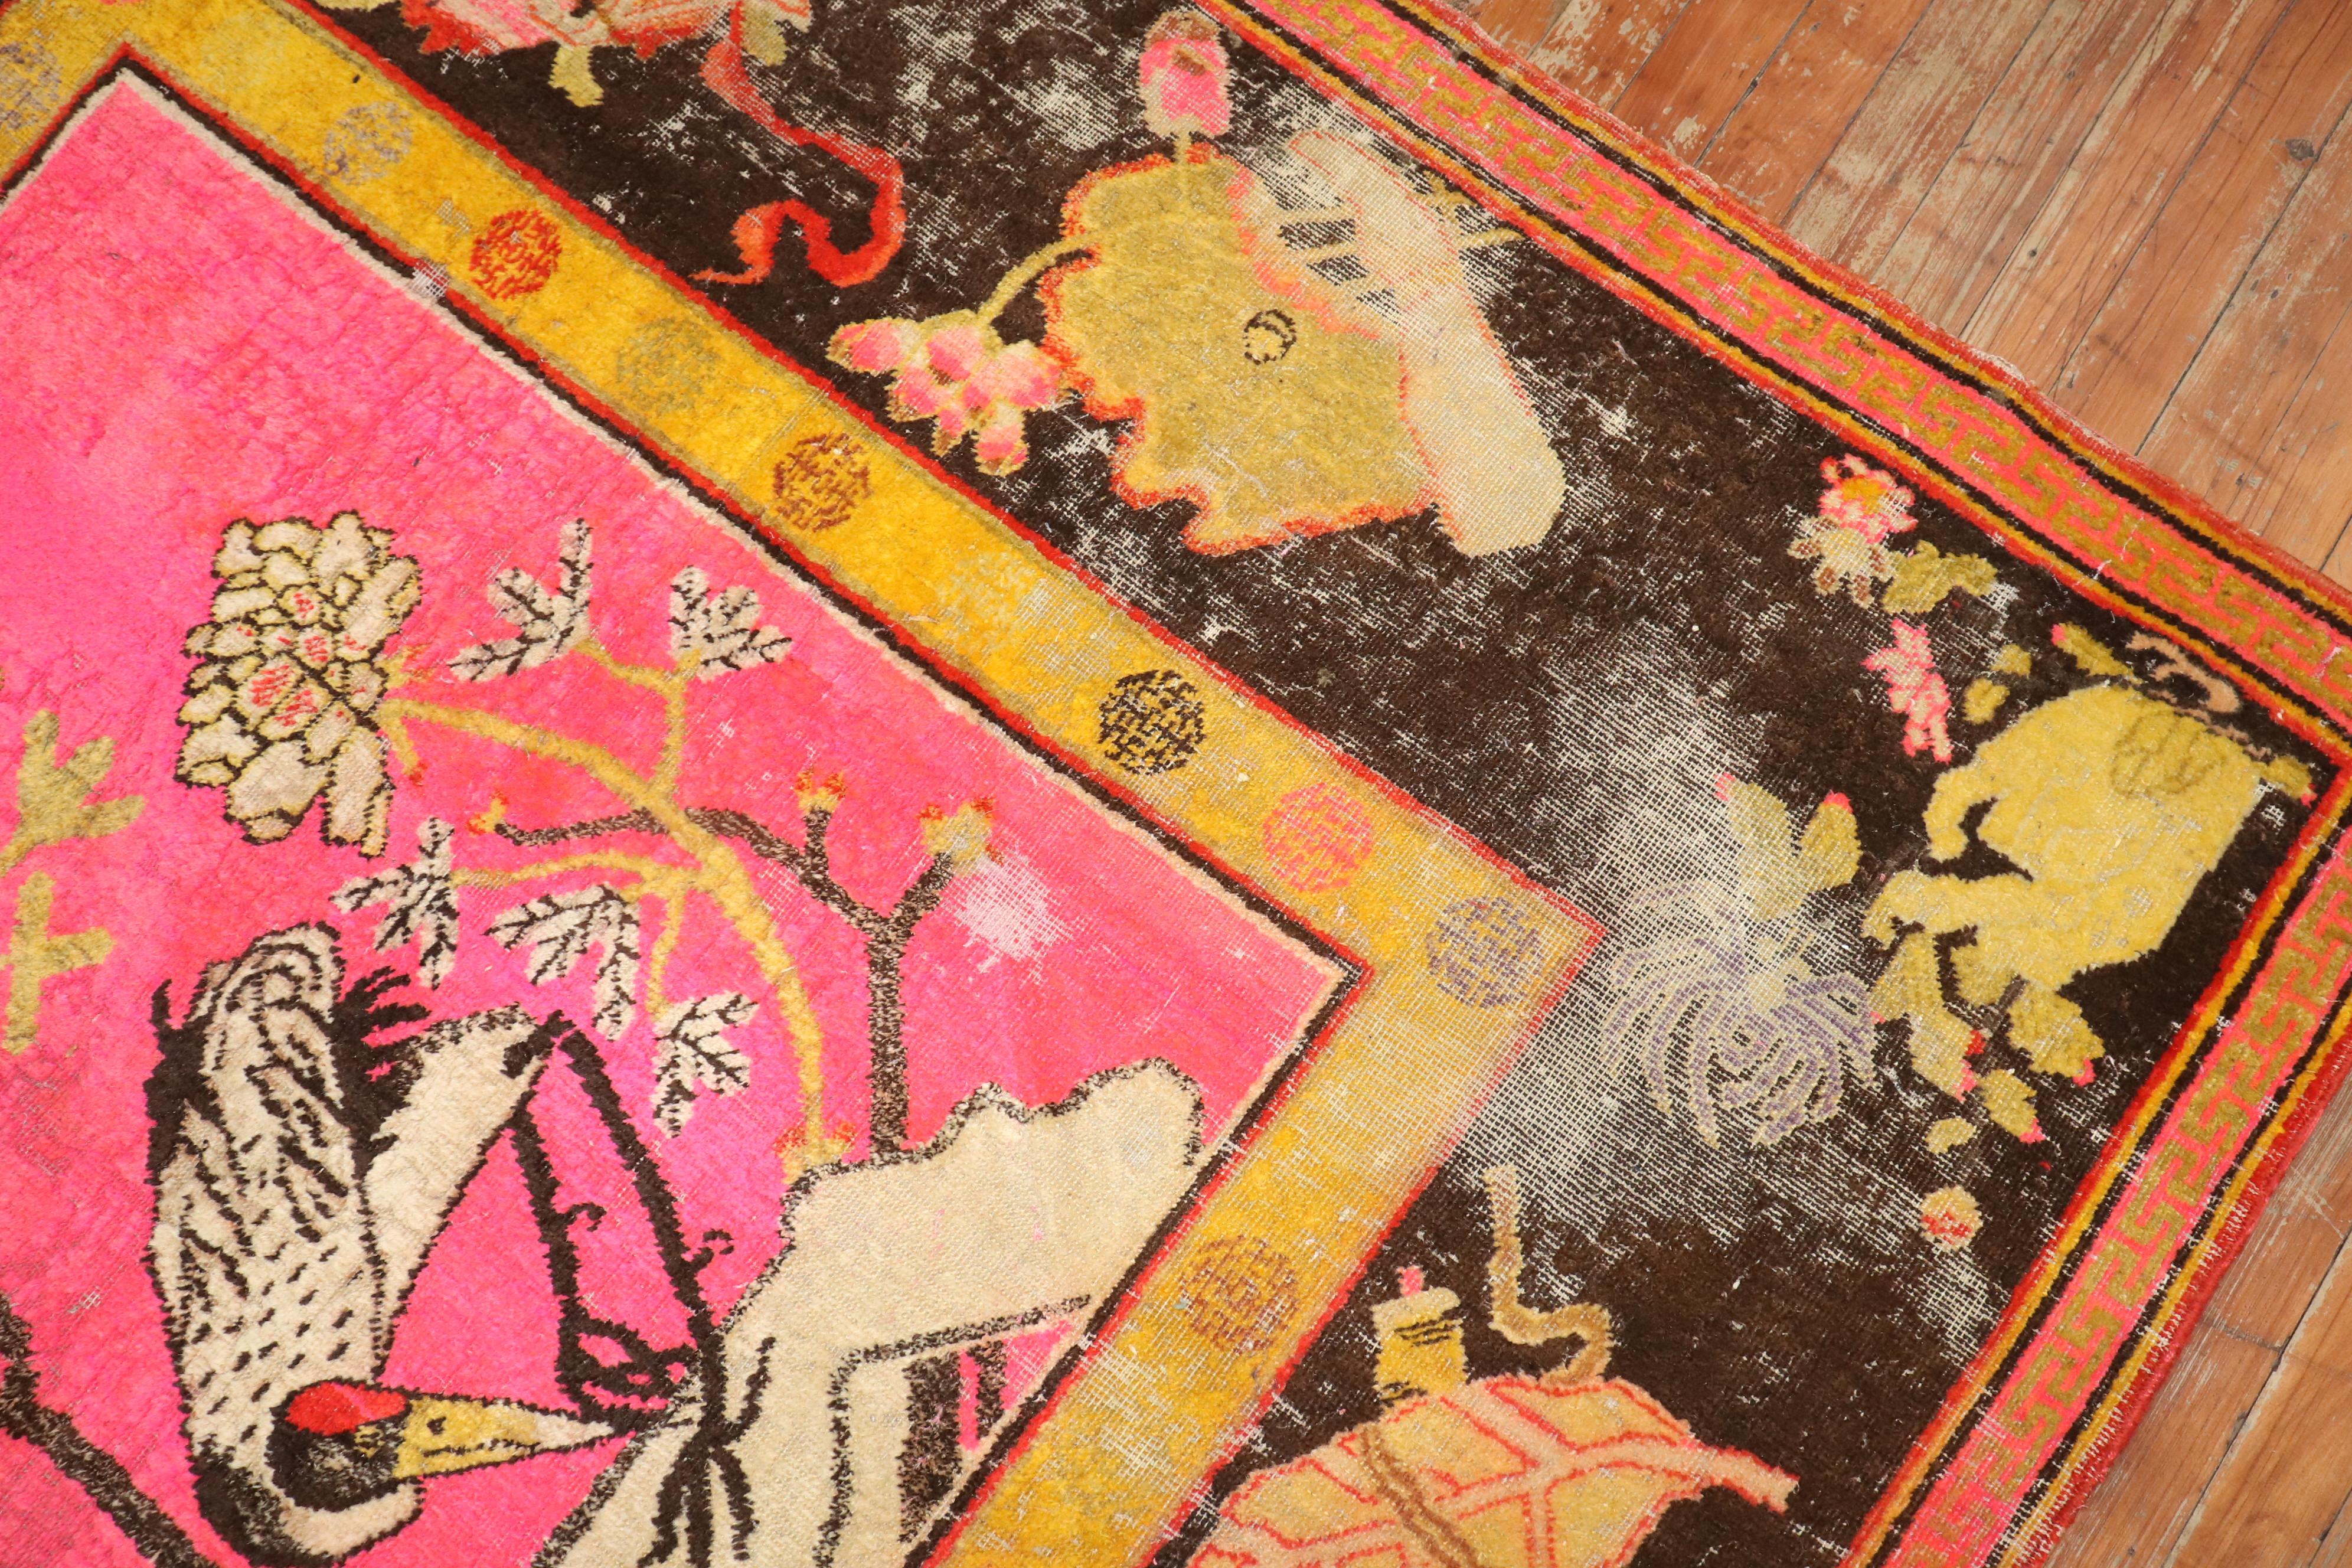 19th Century Zabihi Collection Bright Pink Antique Worn Flamingo Pictorial Khotan Rug For Sale